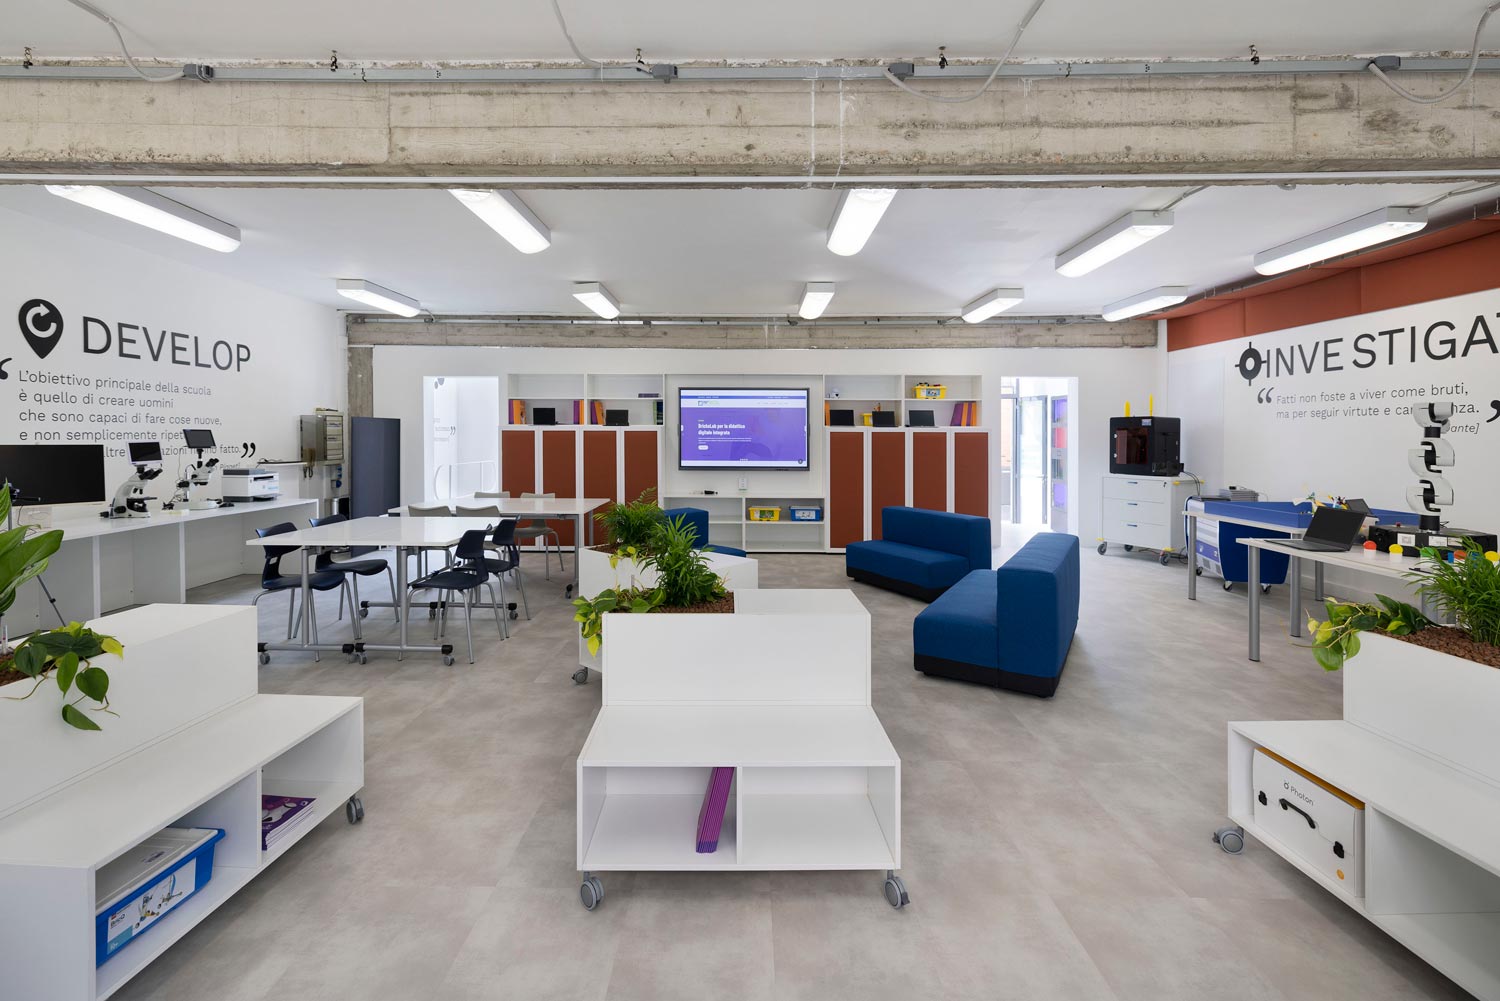 Learning environments 4.0 for the school of the future